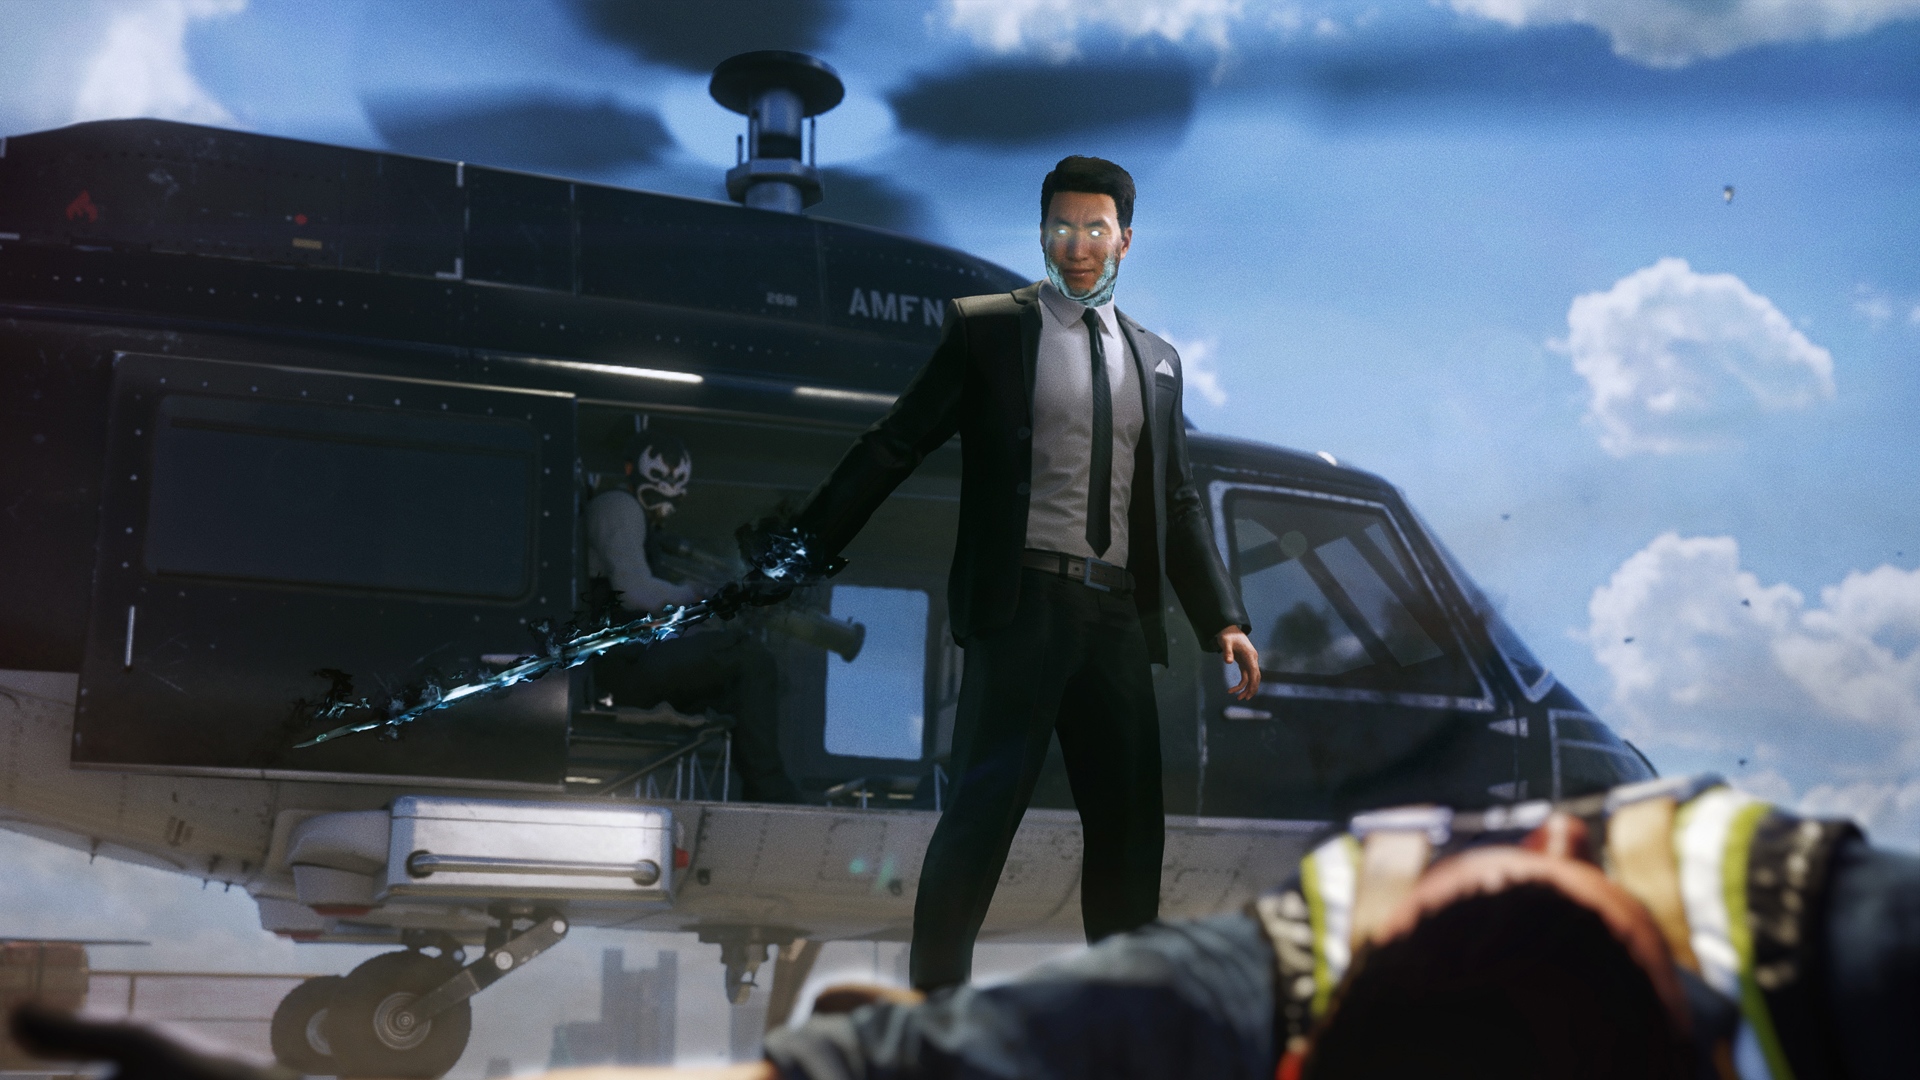 Spider-man Ps4 Video Game Mister Negative Thumbnail - Spider Man Ps4 Helicopter , HD Wallpaper & Backgrounds